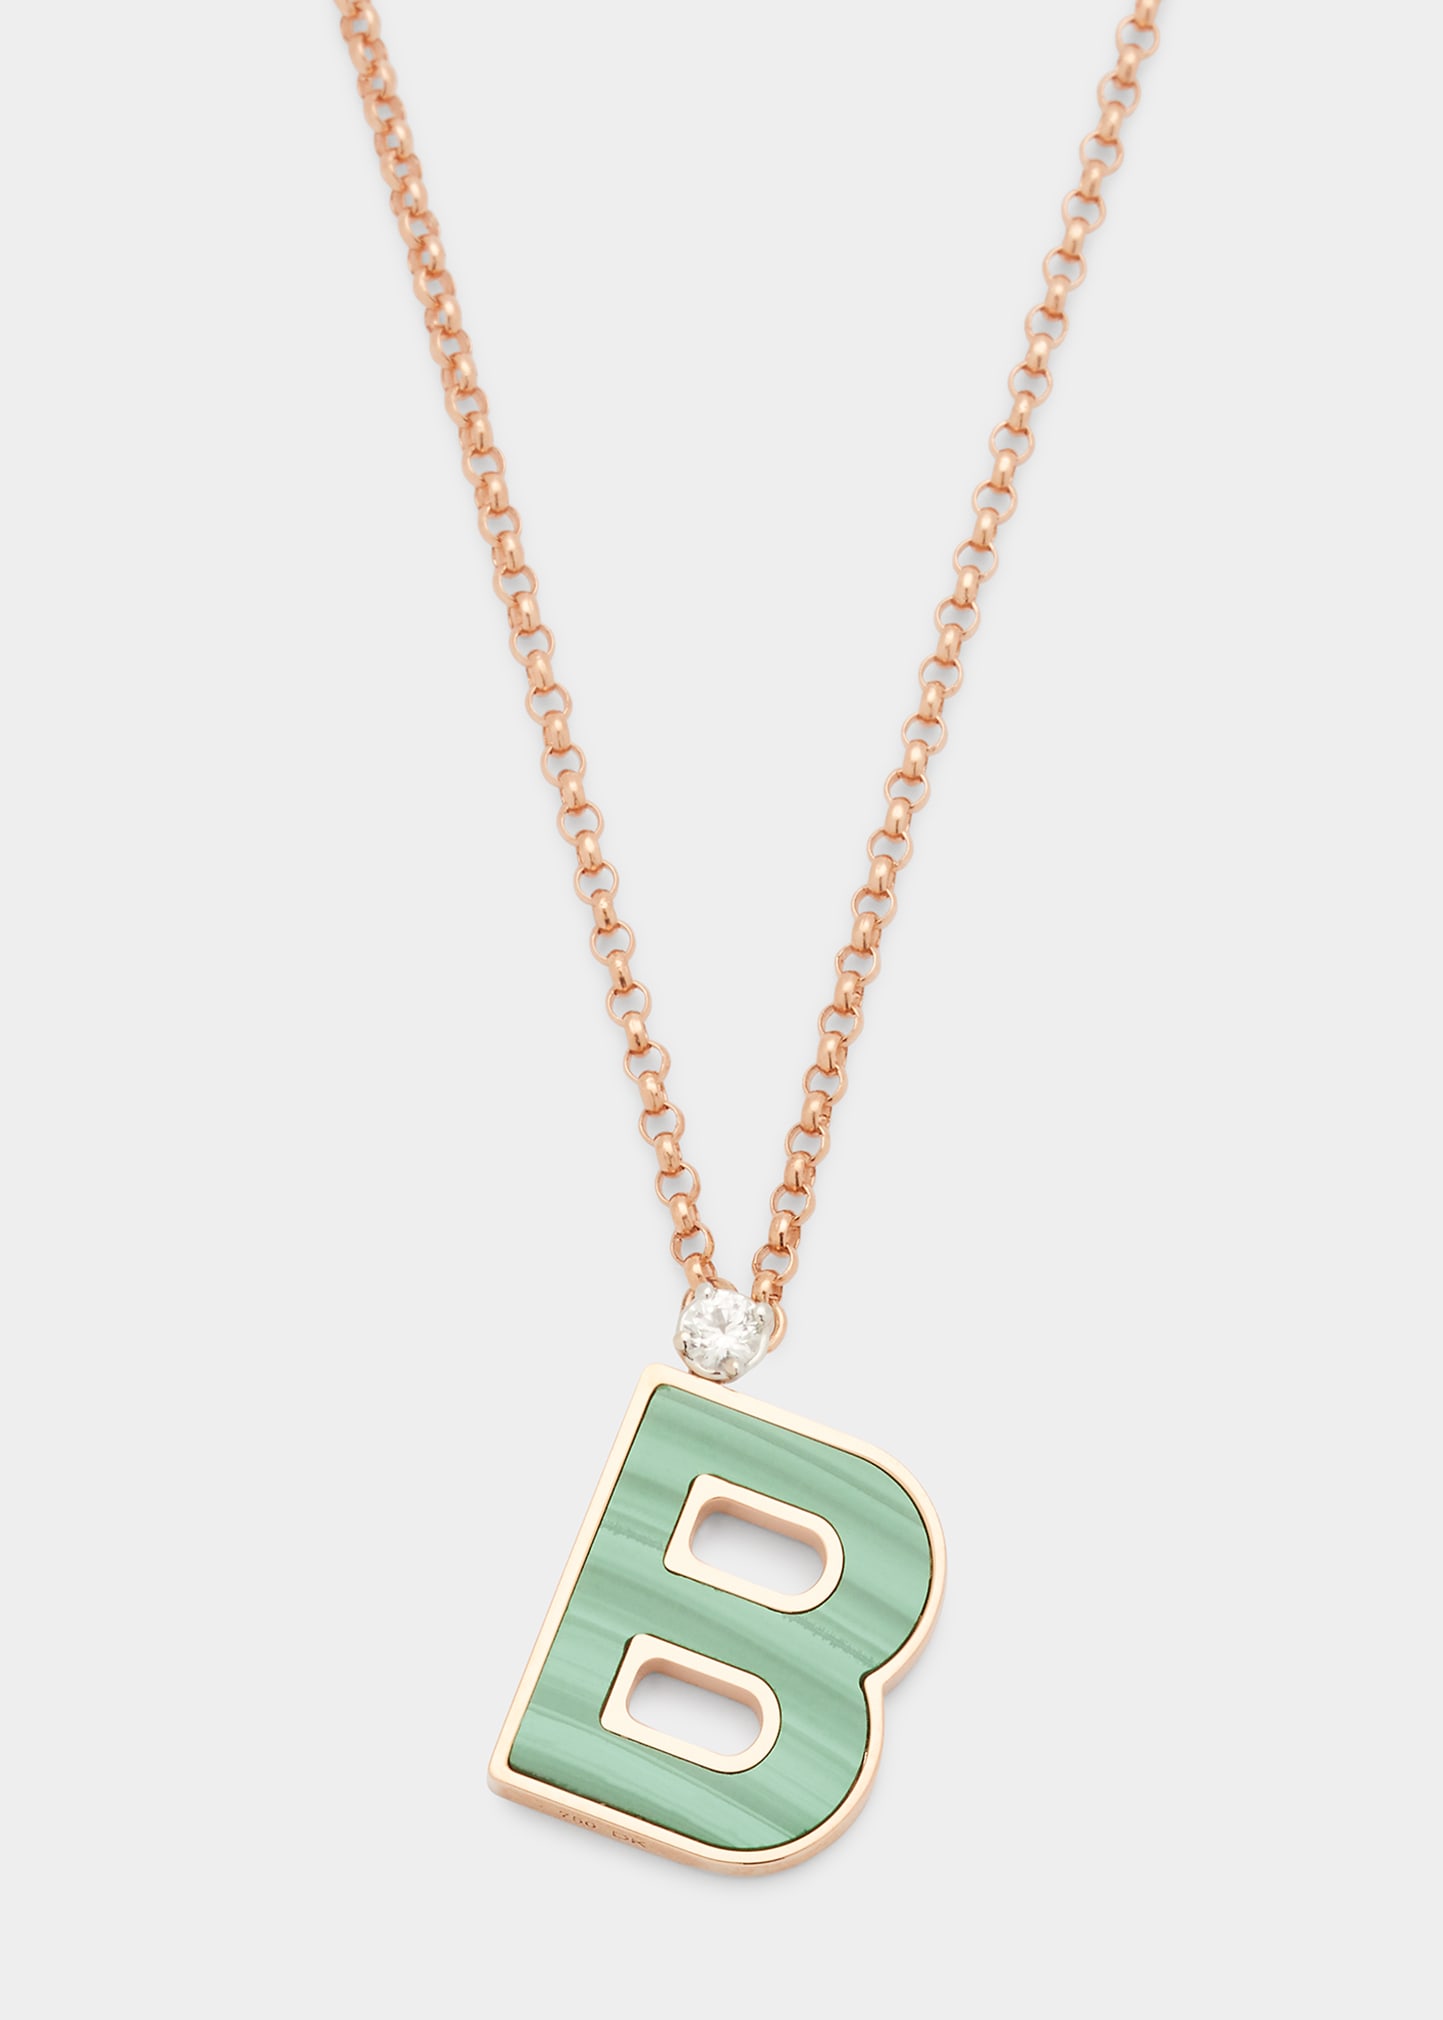 Rose Gold 'B' Letter Charm Necklace with Malachite and White Sapphire